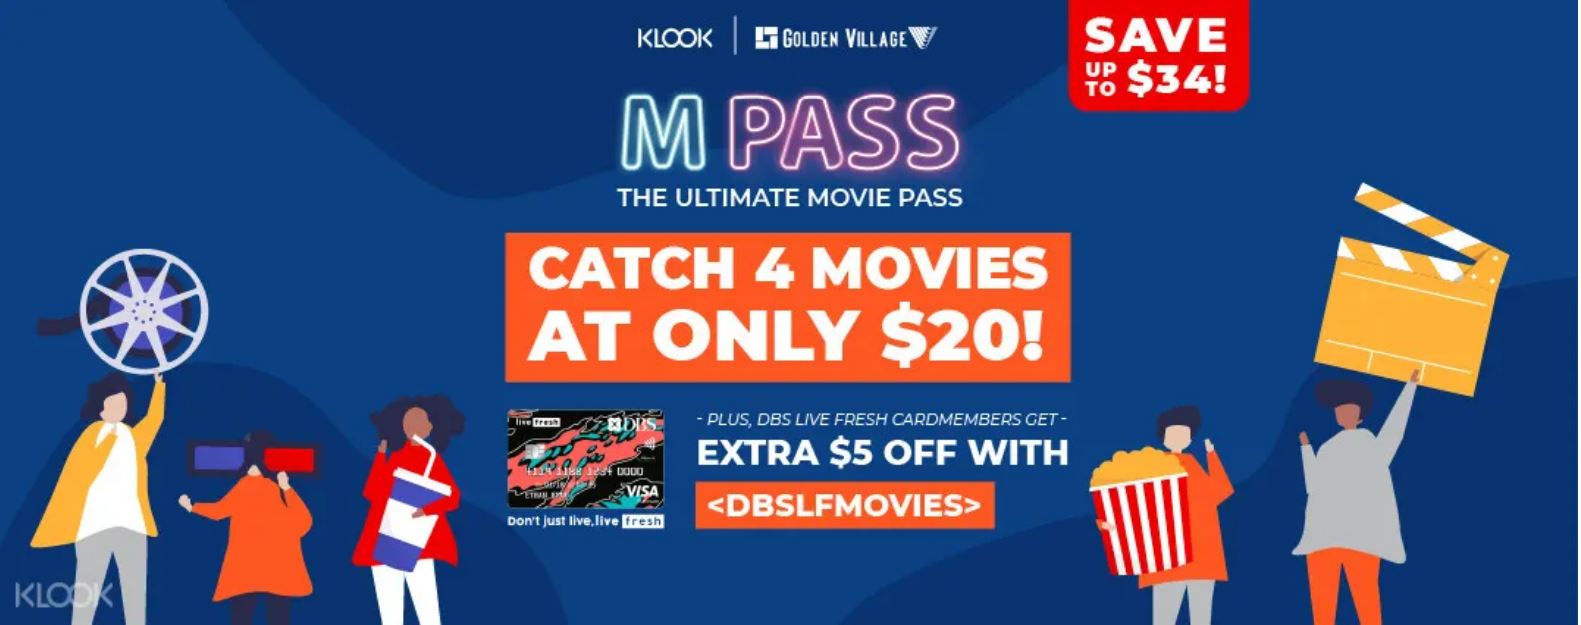 Golden Village’s $20 Movie Pass Lets You Watch Up To 8 Movie Titles - 9